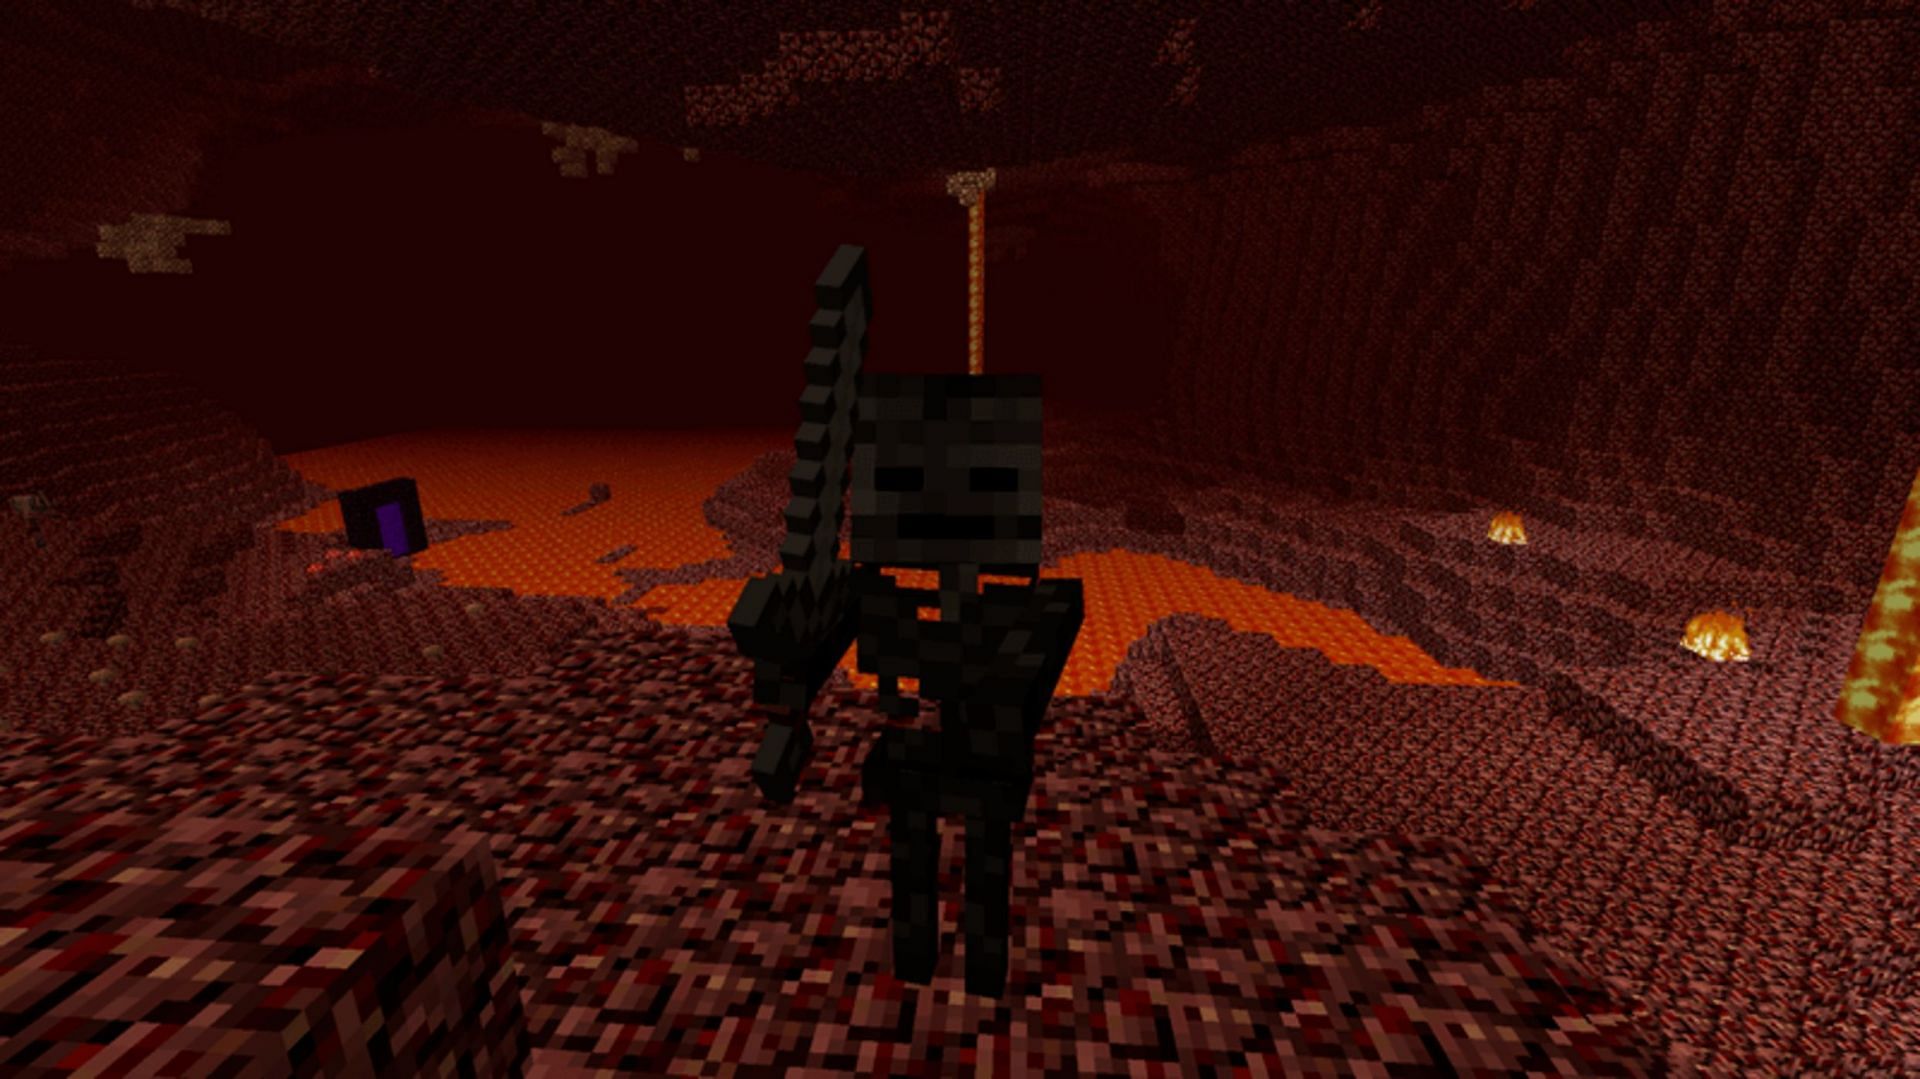 Wither skeletons are hazardous inhabitants of the Nether in Minecraft (Image via Mojang)